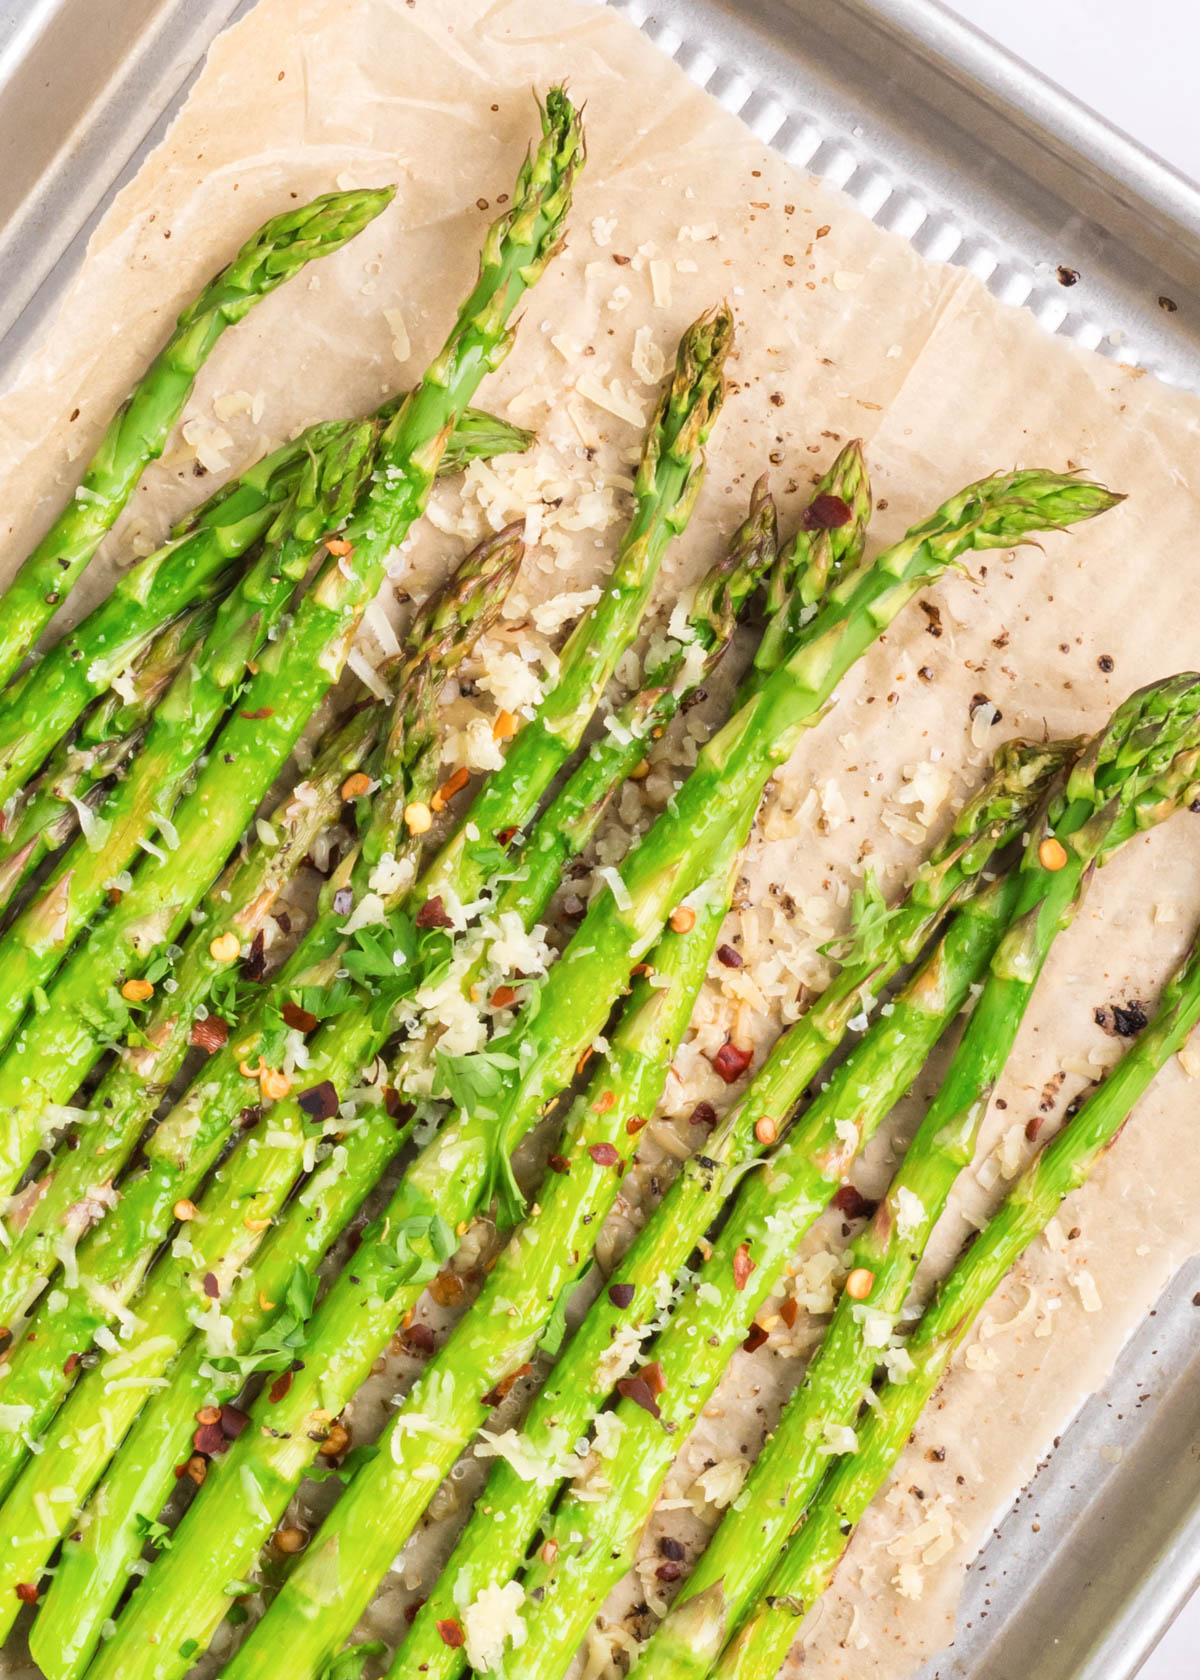 Parmesan roasted asparagus with crushed red pepper flakes, ready to serve.